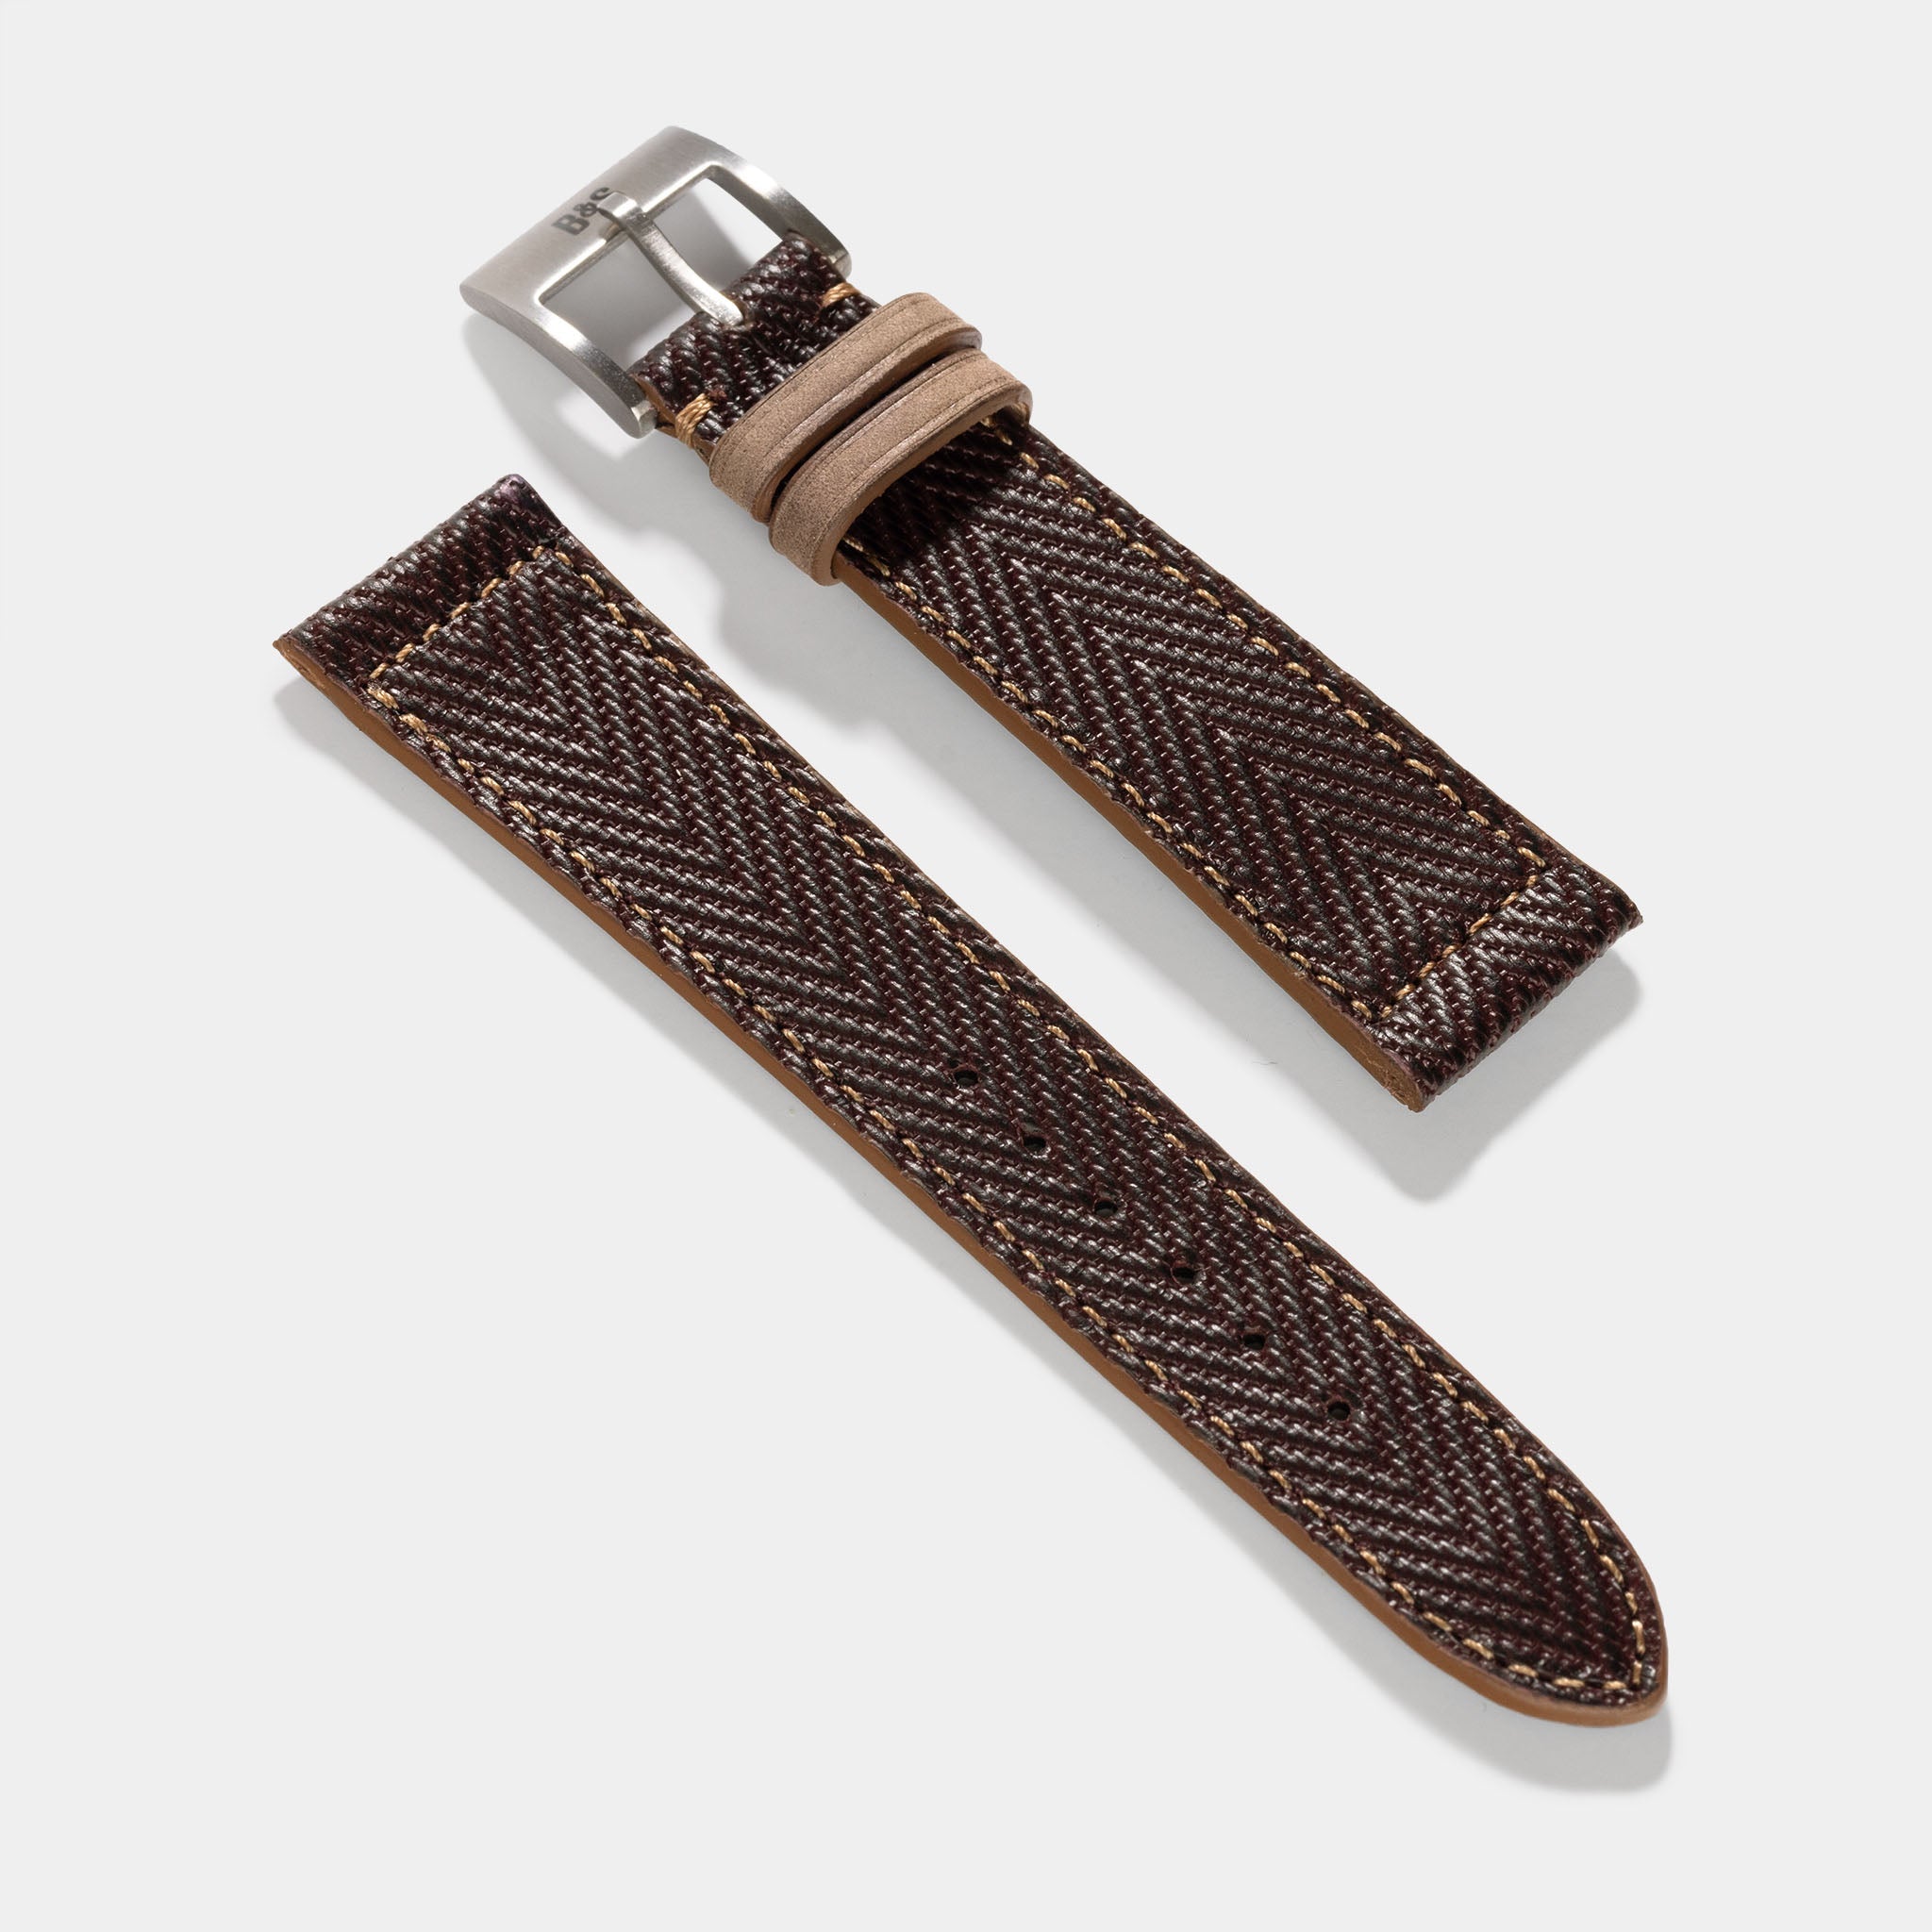 The Limited Edition ManhattanRollie Leather Watch Strap – Charity Edition